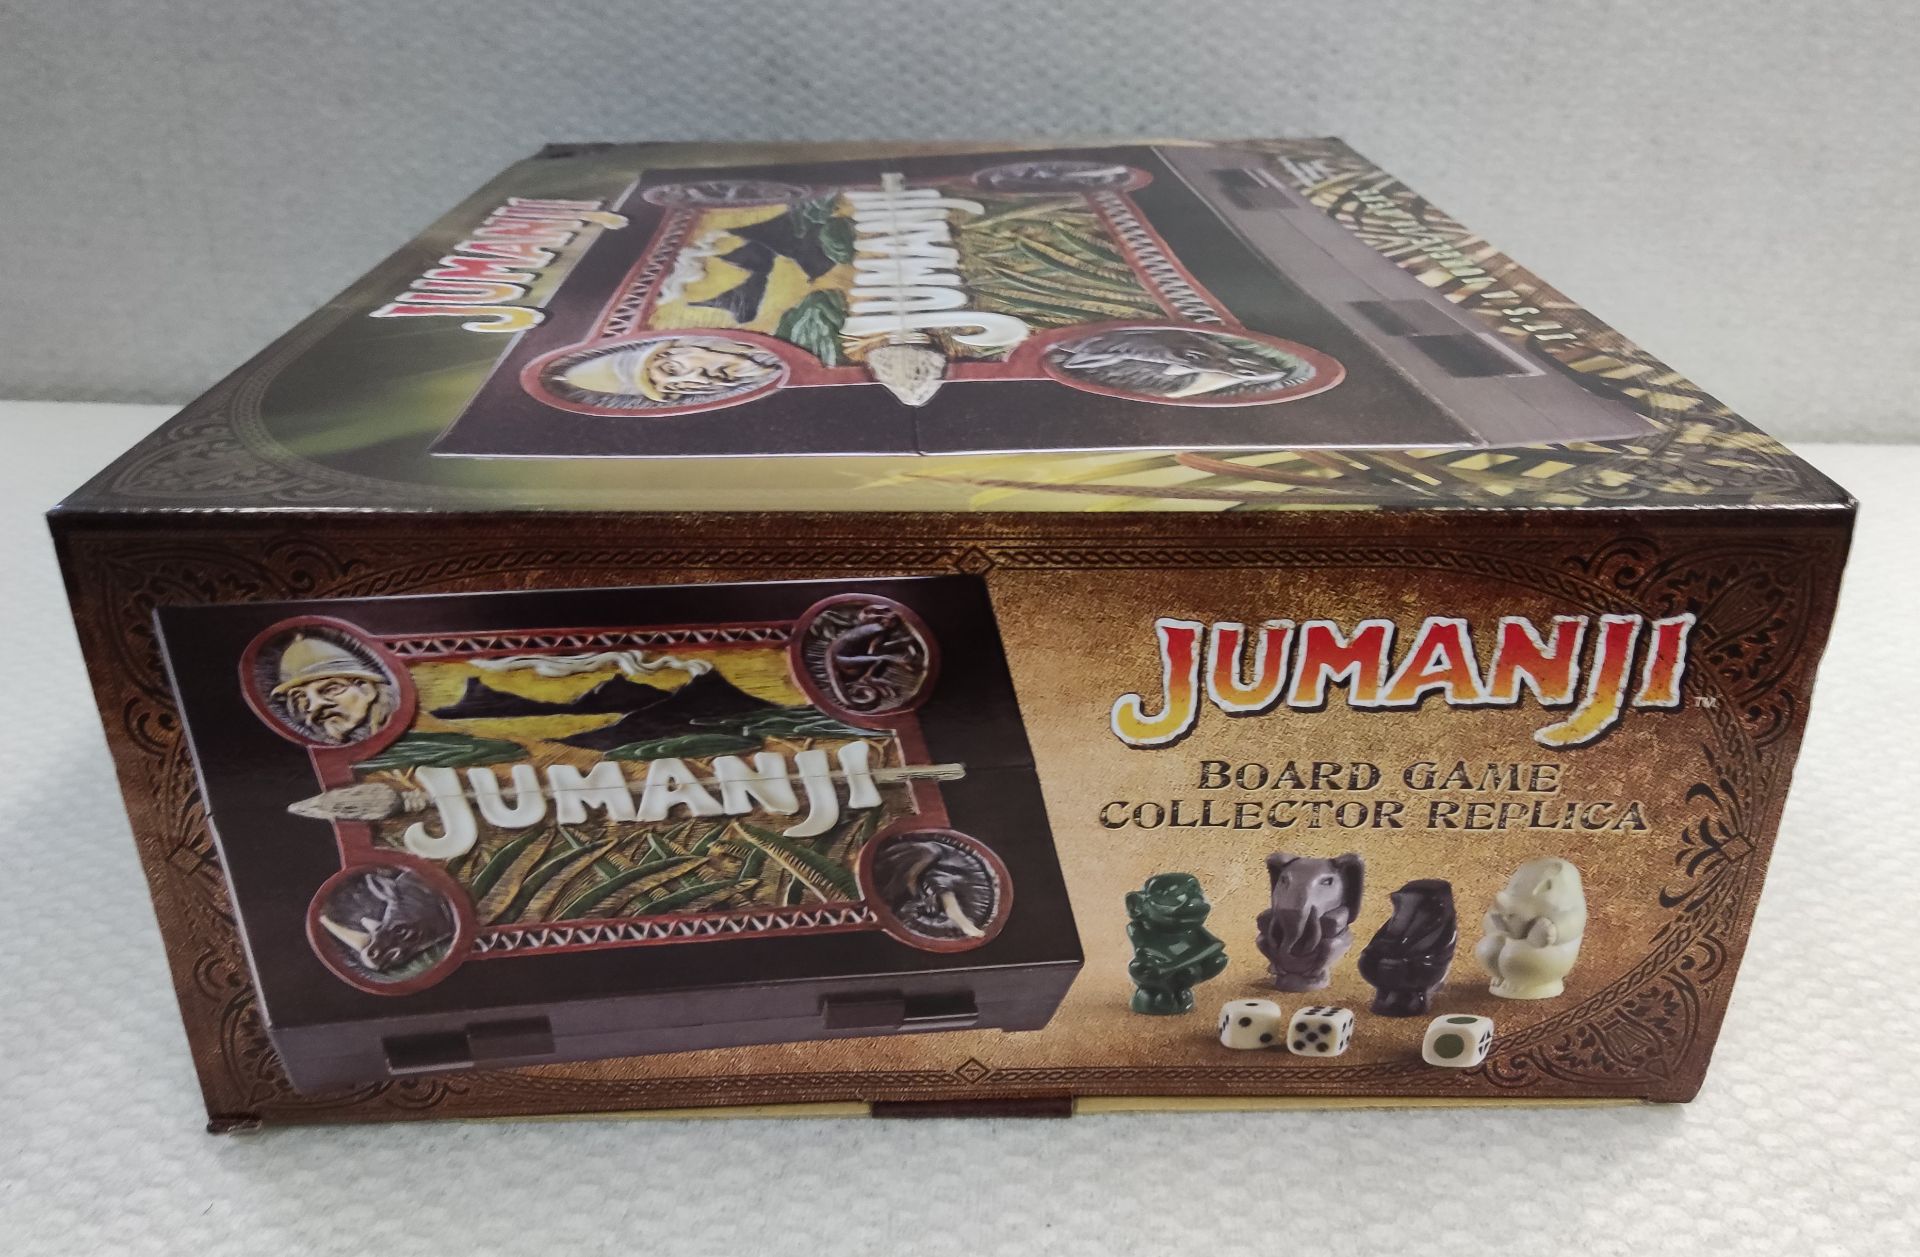 1 x Jumanji Board Game From the Noble Collection - New/Boxed - Image 7 of 8